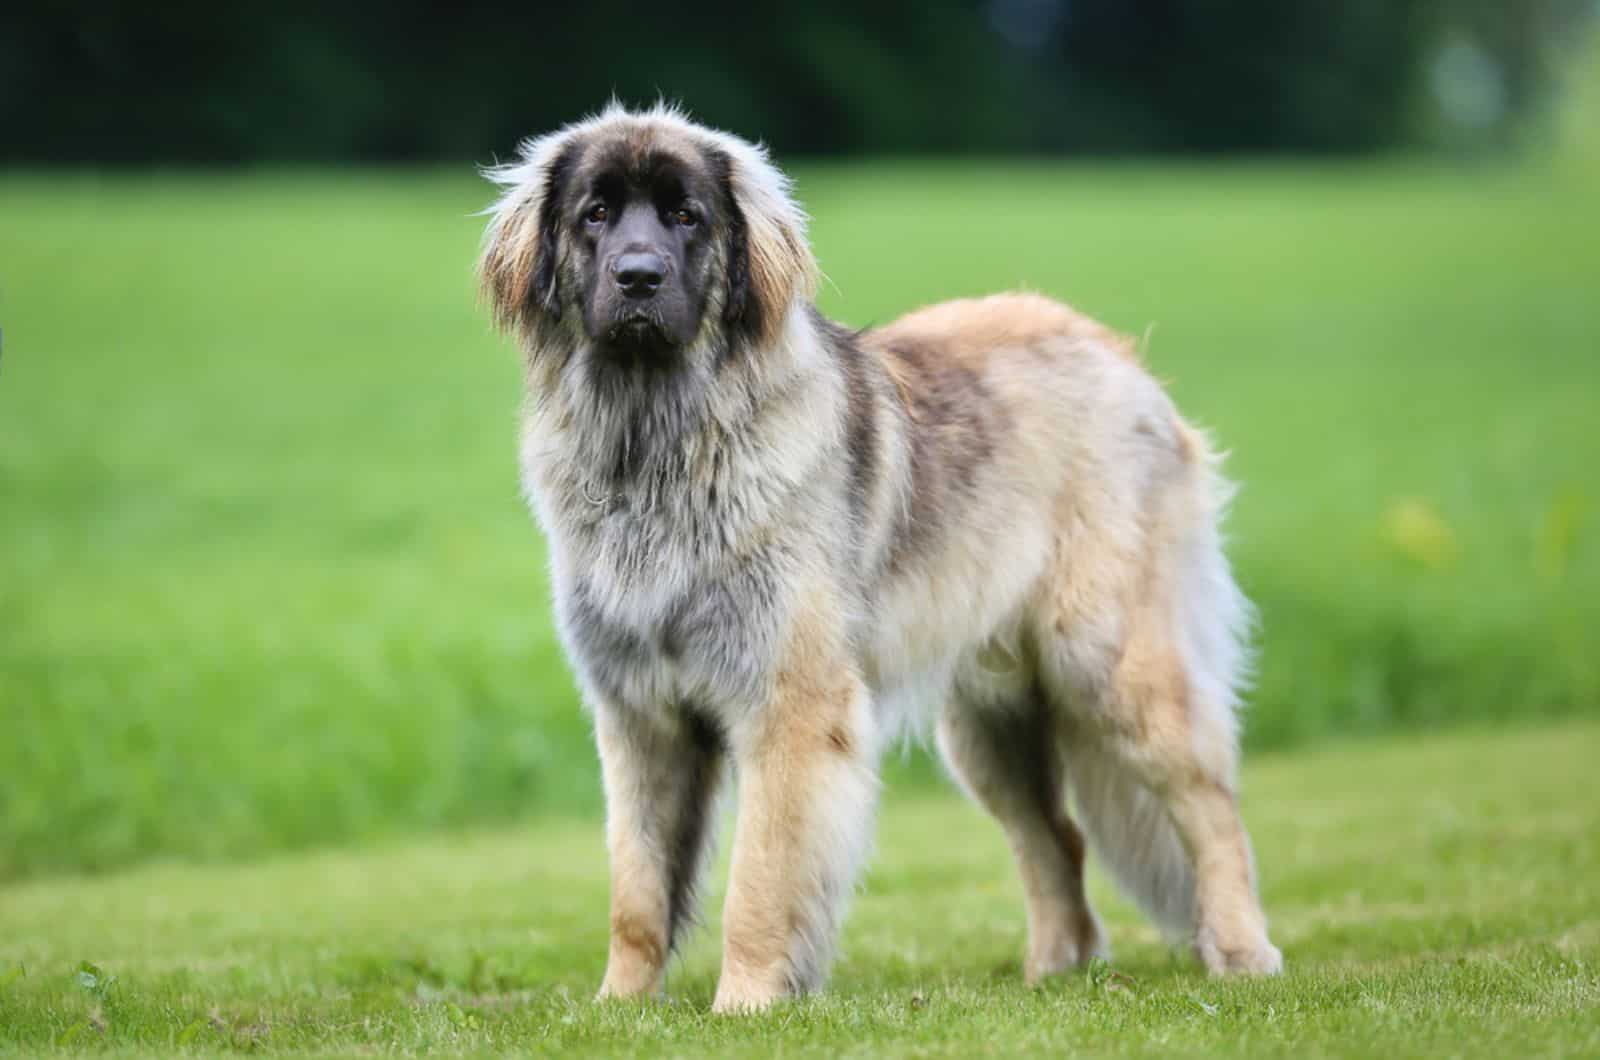 leonberger dog standing on a lawn